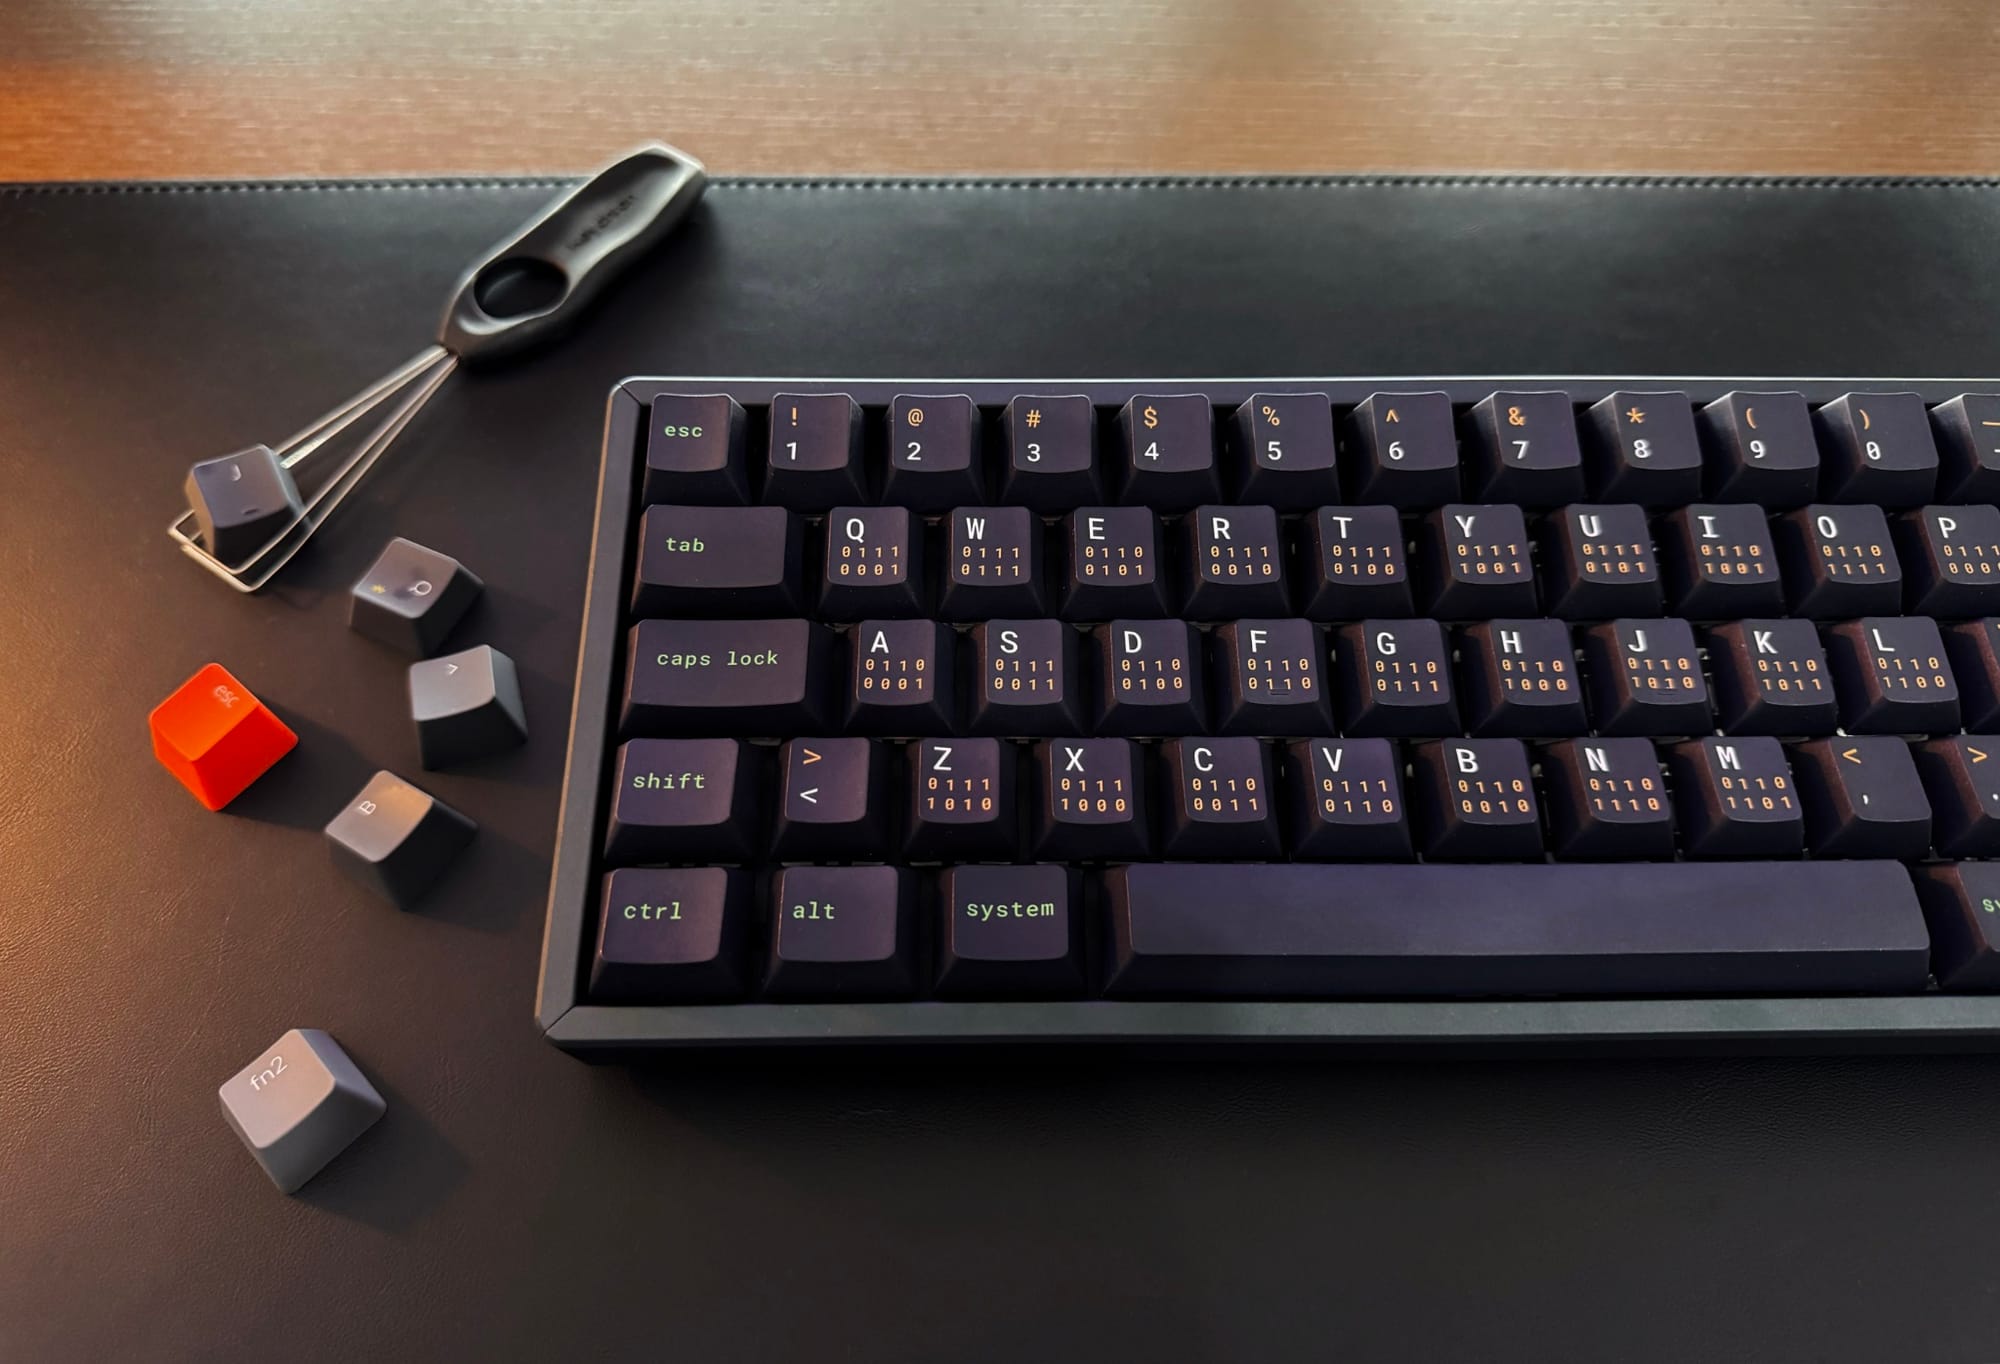 The Keychron K6 keyboard with custom key caps and some extra keycaps scattered on the side